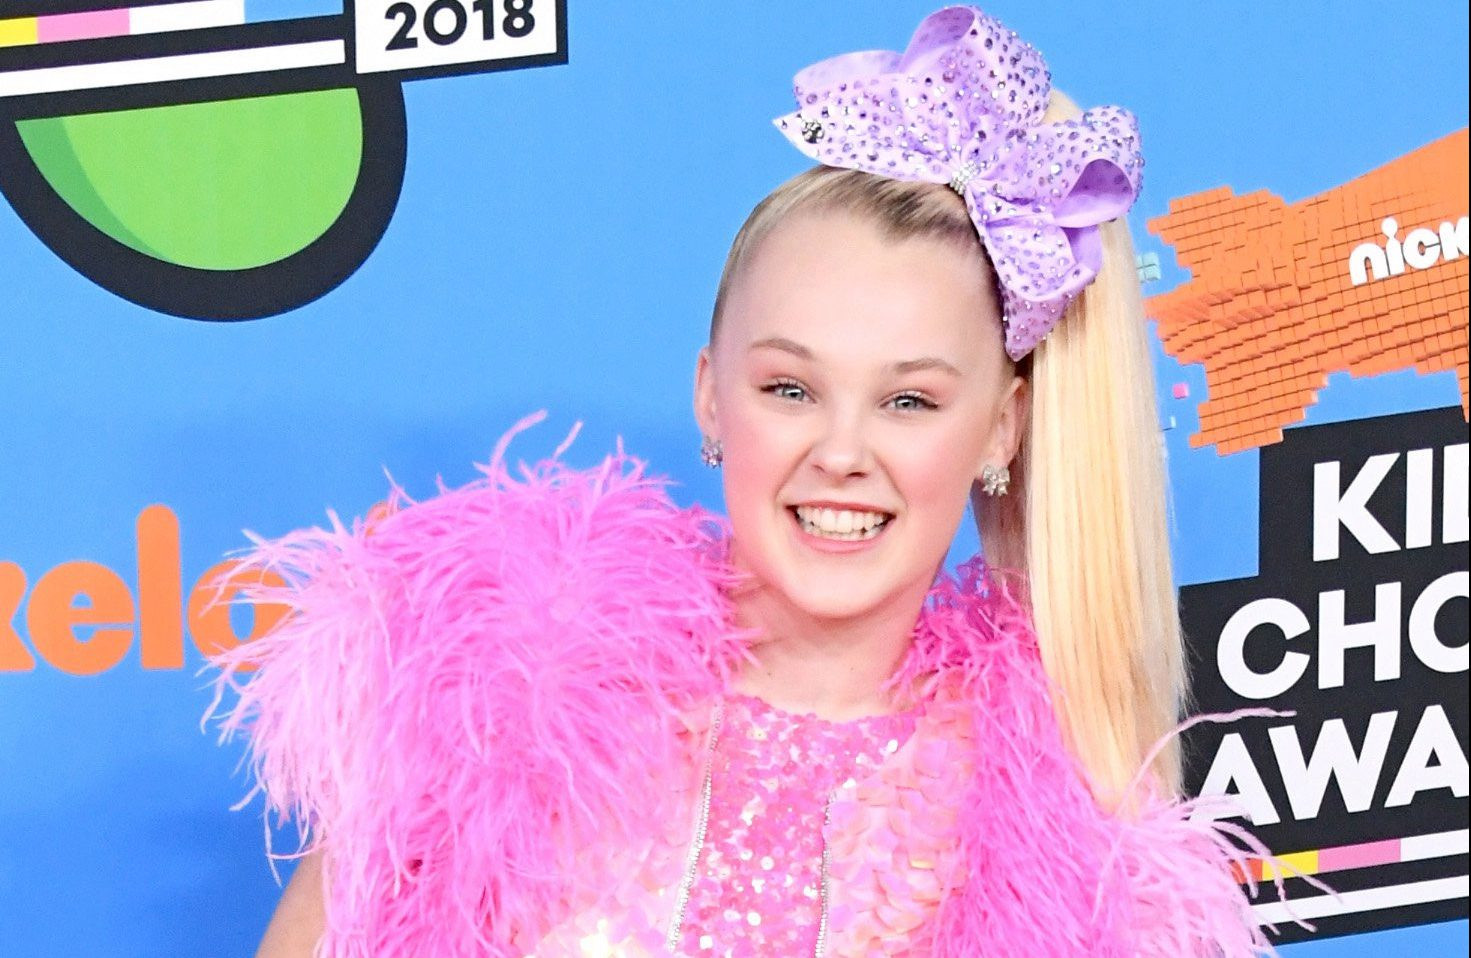 How old is JoJo Siwa and what is she famous for?